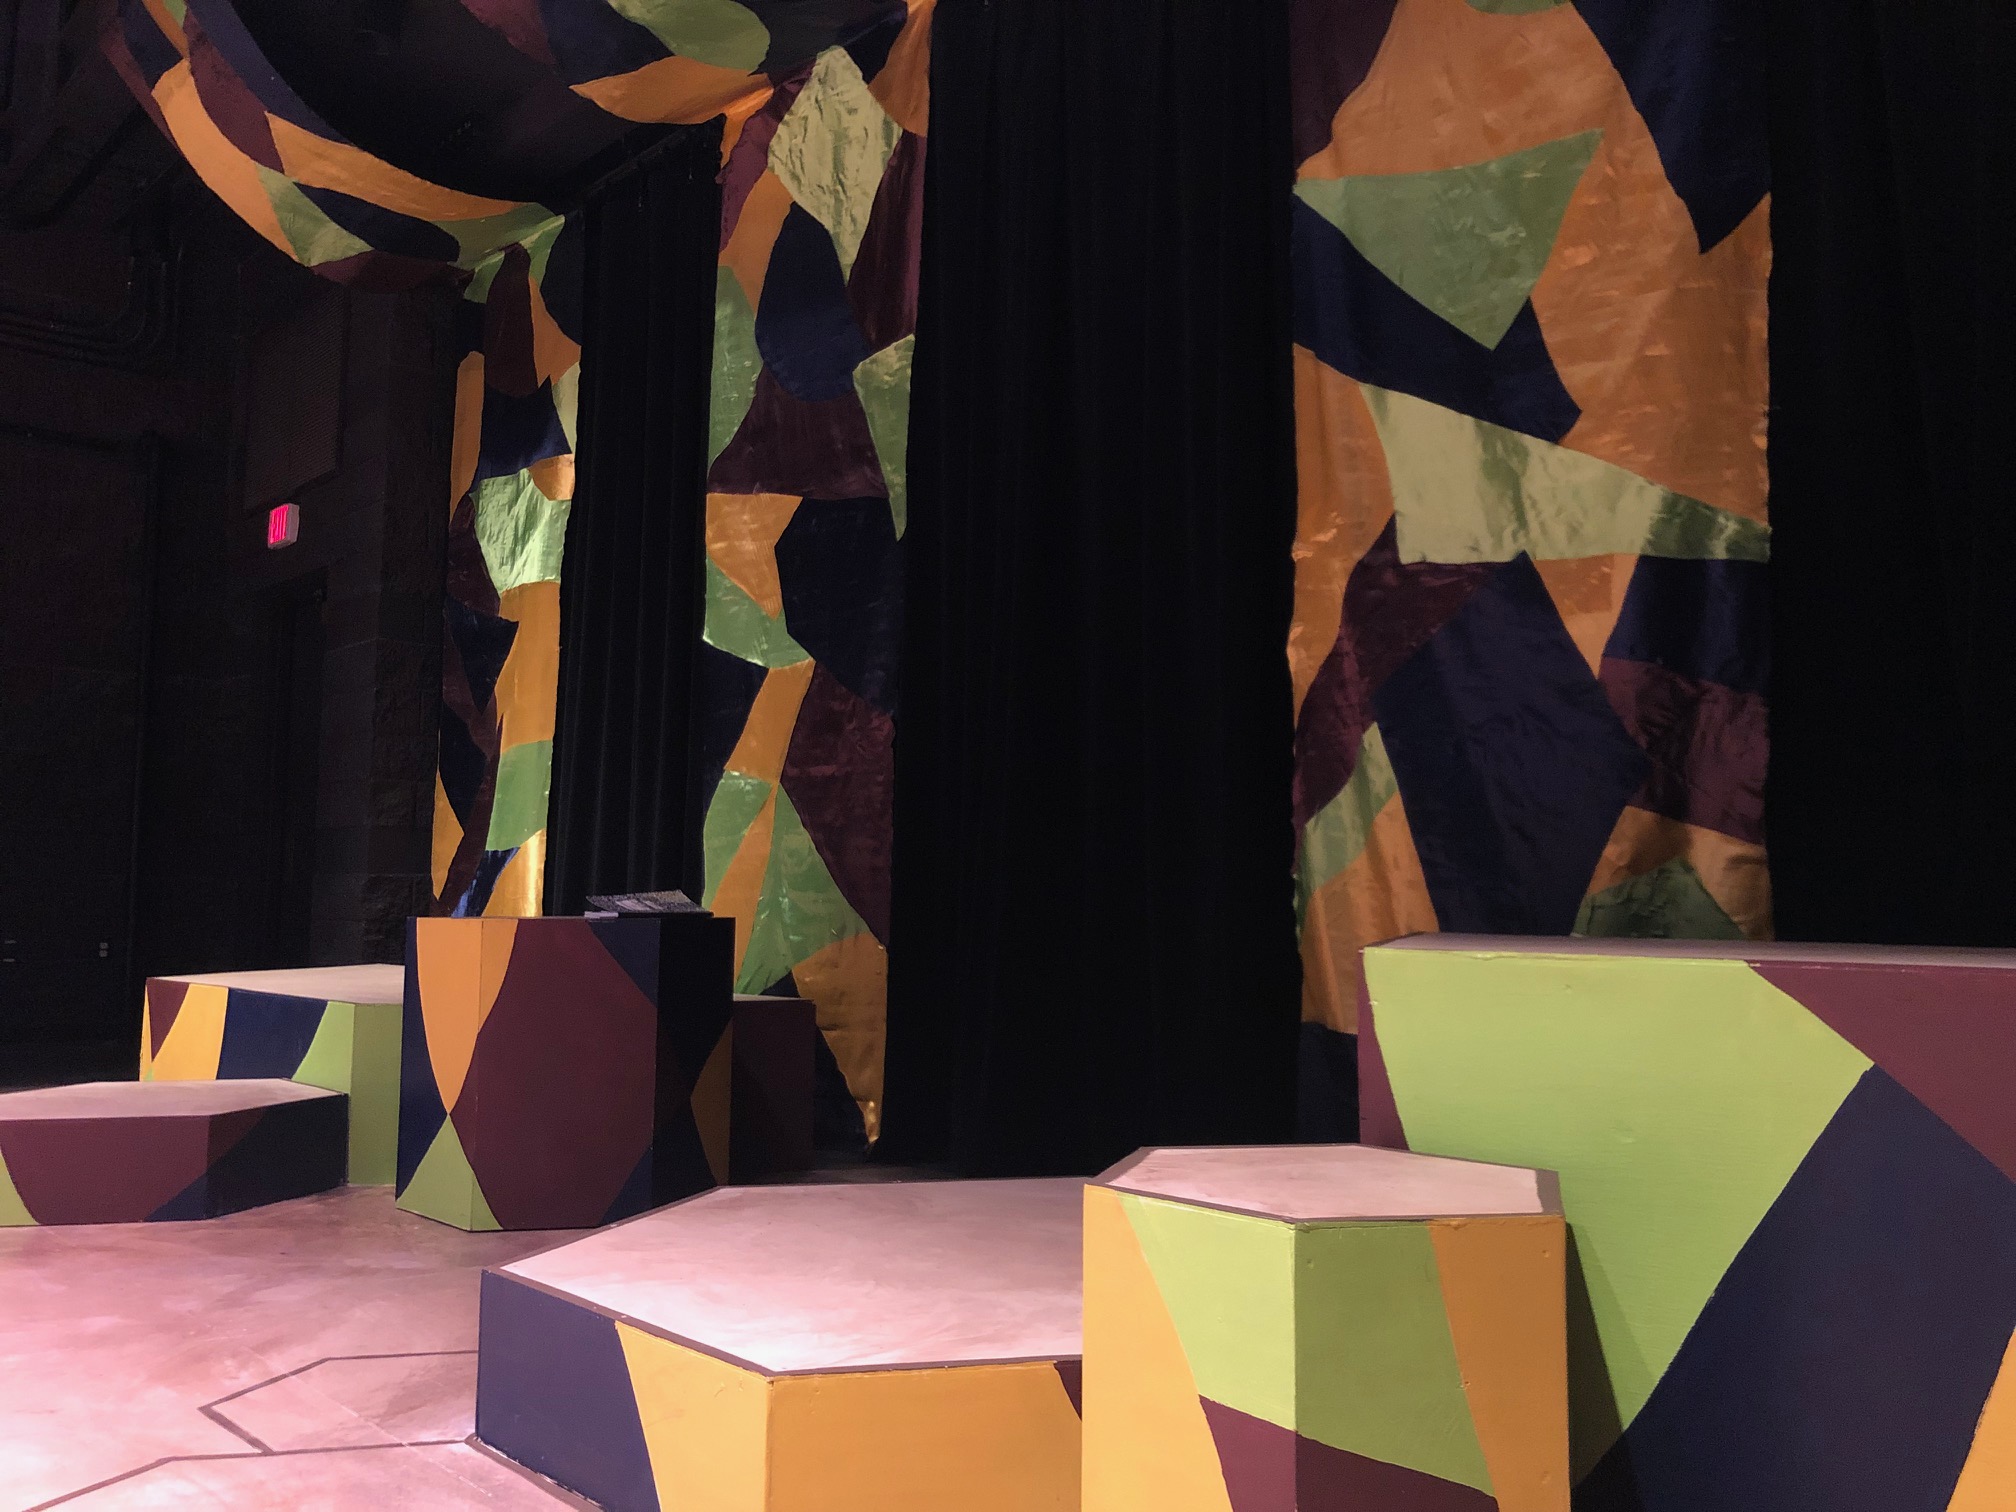 Onstage, there are a handful of hexagon outlines on the floor in addition to a collection of miniature stages of varied heights with a single black composition notebook atop one. Photo by Alyssa Buckley.